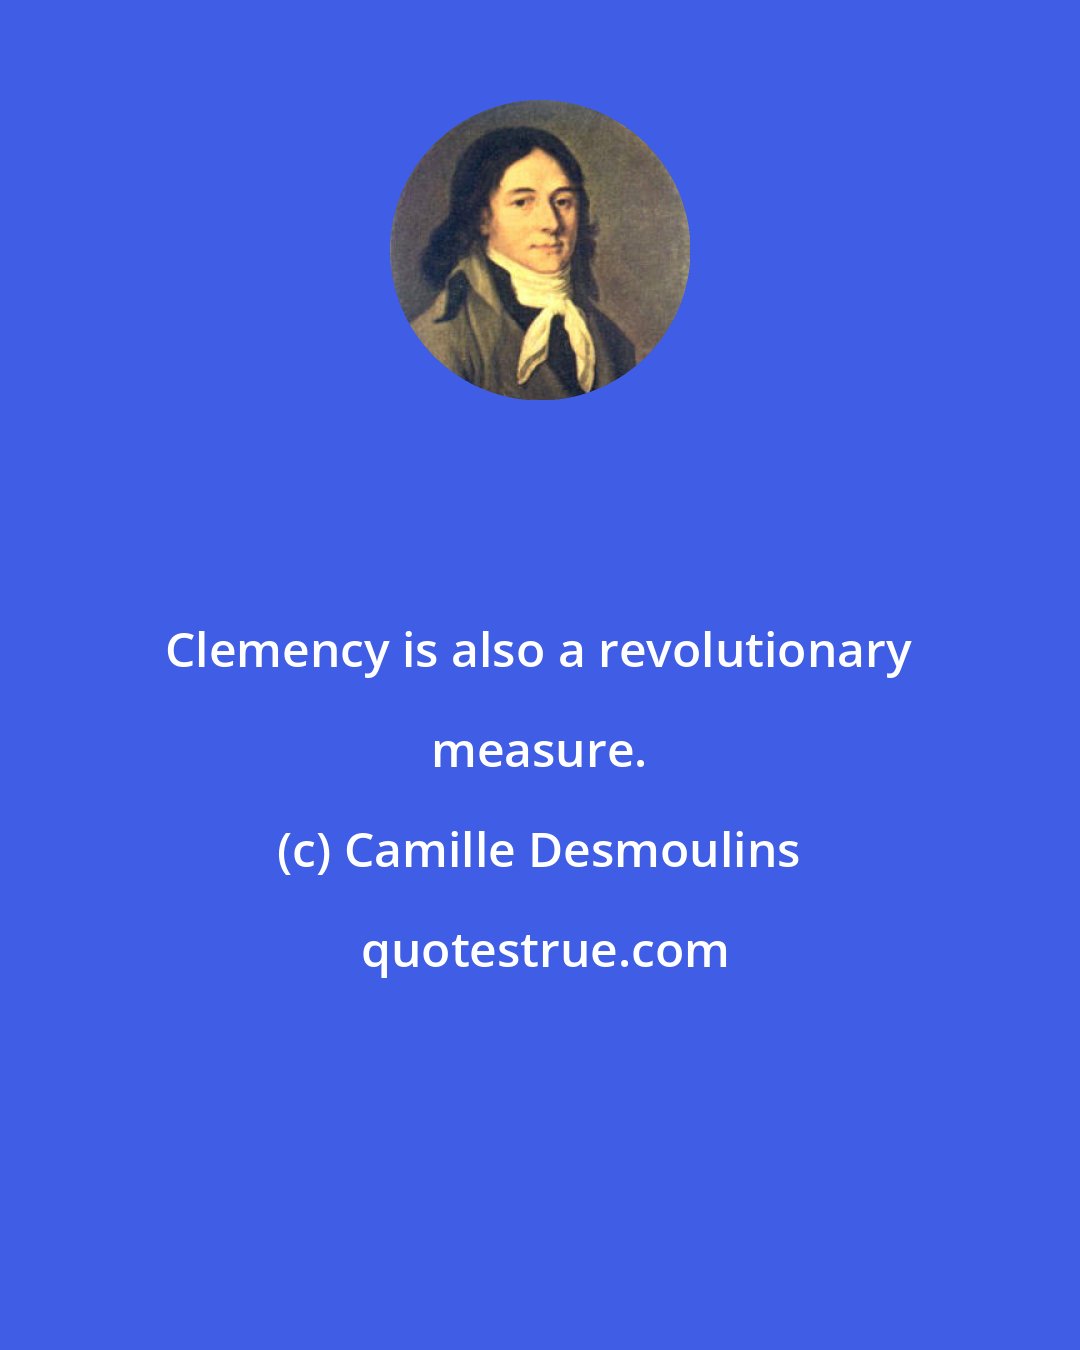 Camille Desmoulins: Clemency is also a revolutionary measure.